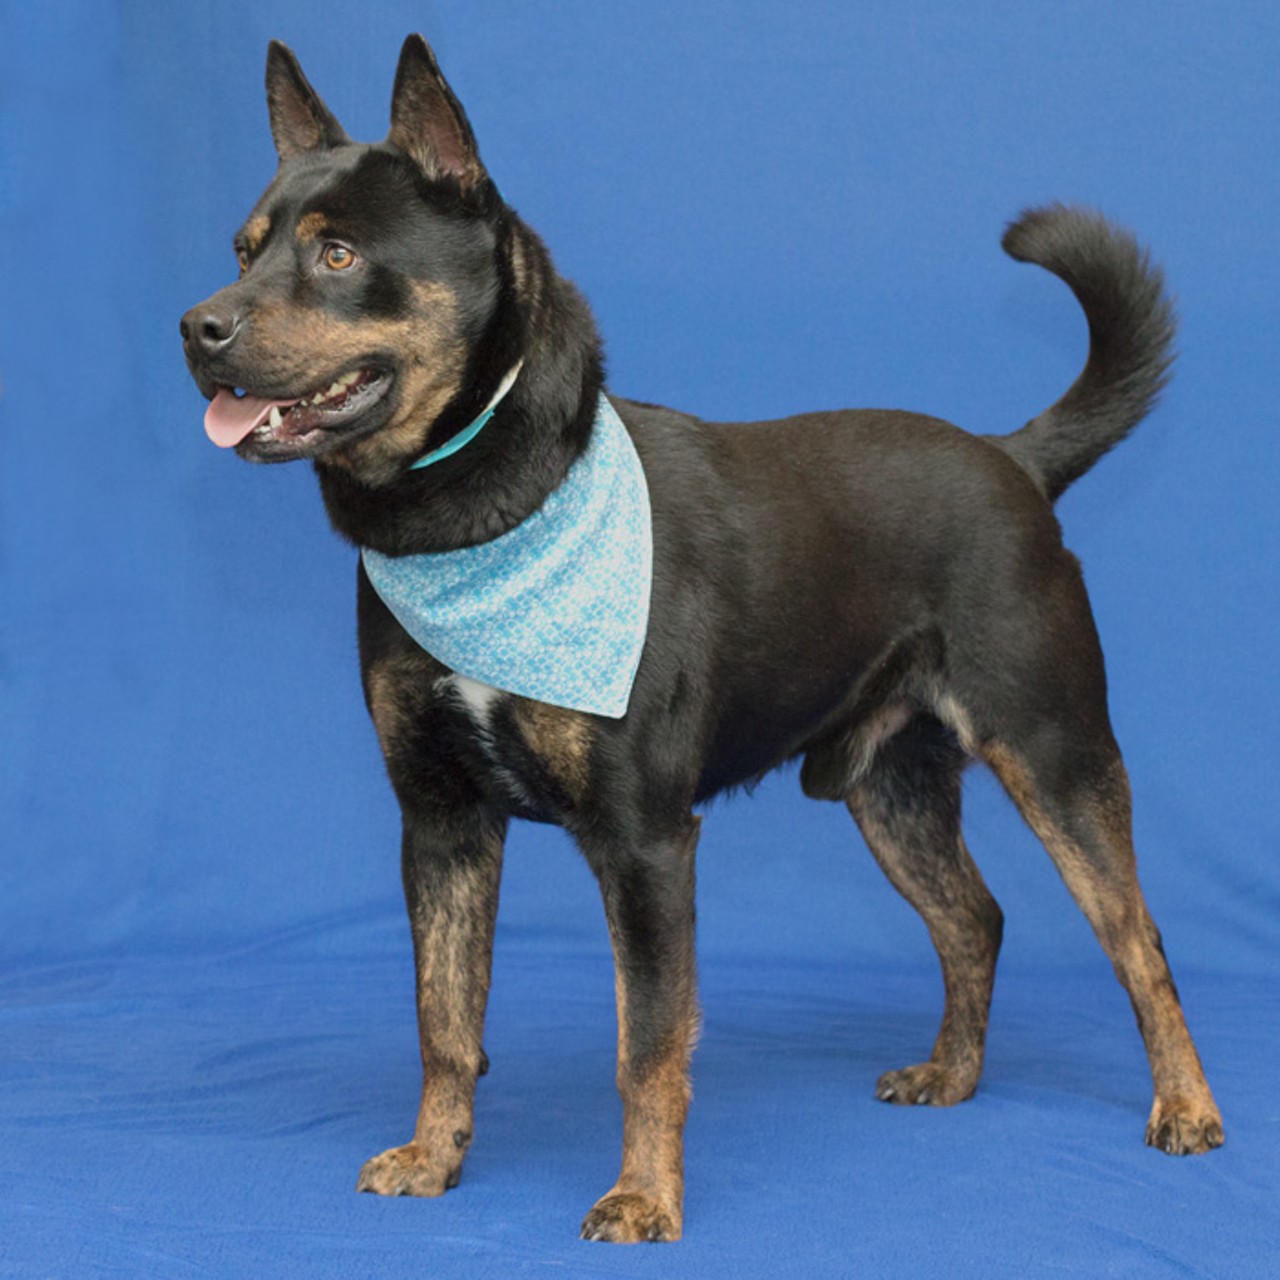 NAME: Benji
GENDER: Male
BREED: Australian Cattle Dog-Blue Heeler-Rottweiler mix
AGE: 1 year, 6 months
WEIGHT: 39 pounds
SPECIAL CONSIDERATIONS: None
REASON I CAME TO MHS: Agency transfer
LOCATION: Berman Center for Animal Care in Westland
ID NUMBER: 864960